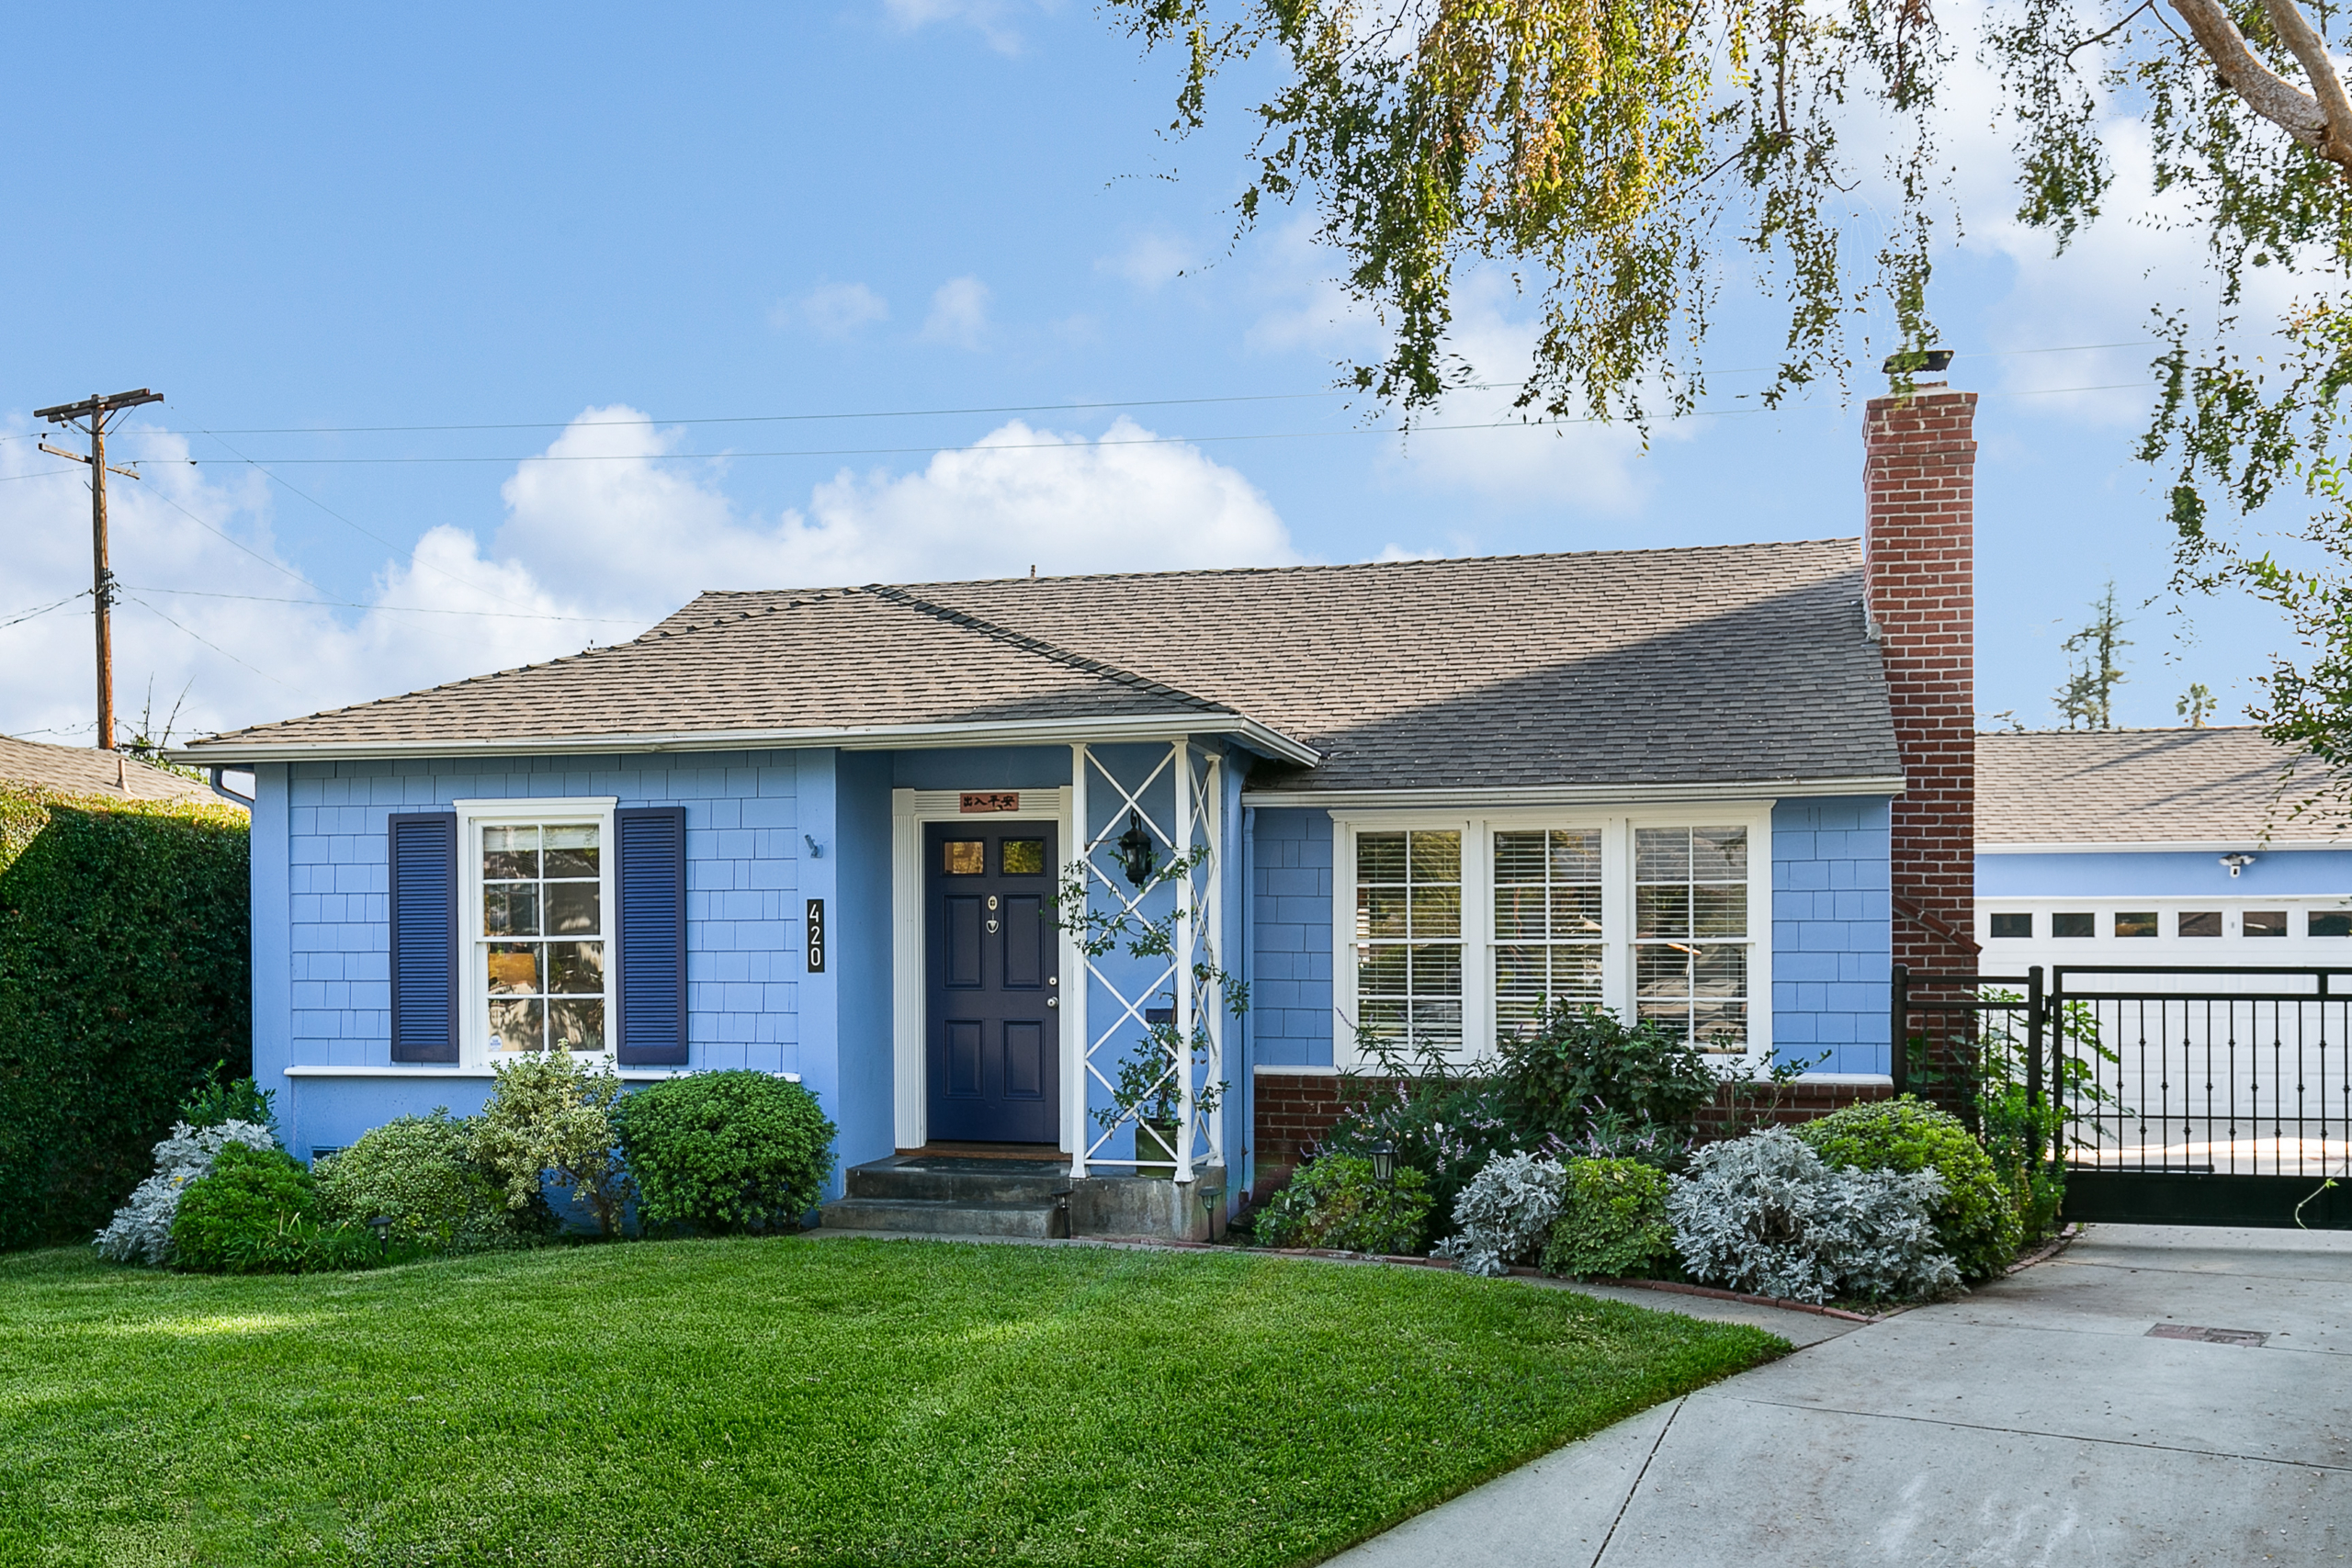 Front of blue, shingled cottage with white trim and green lawn